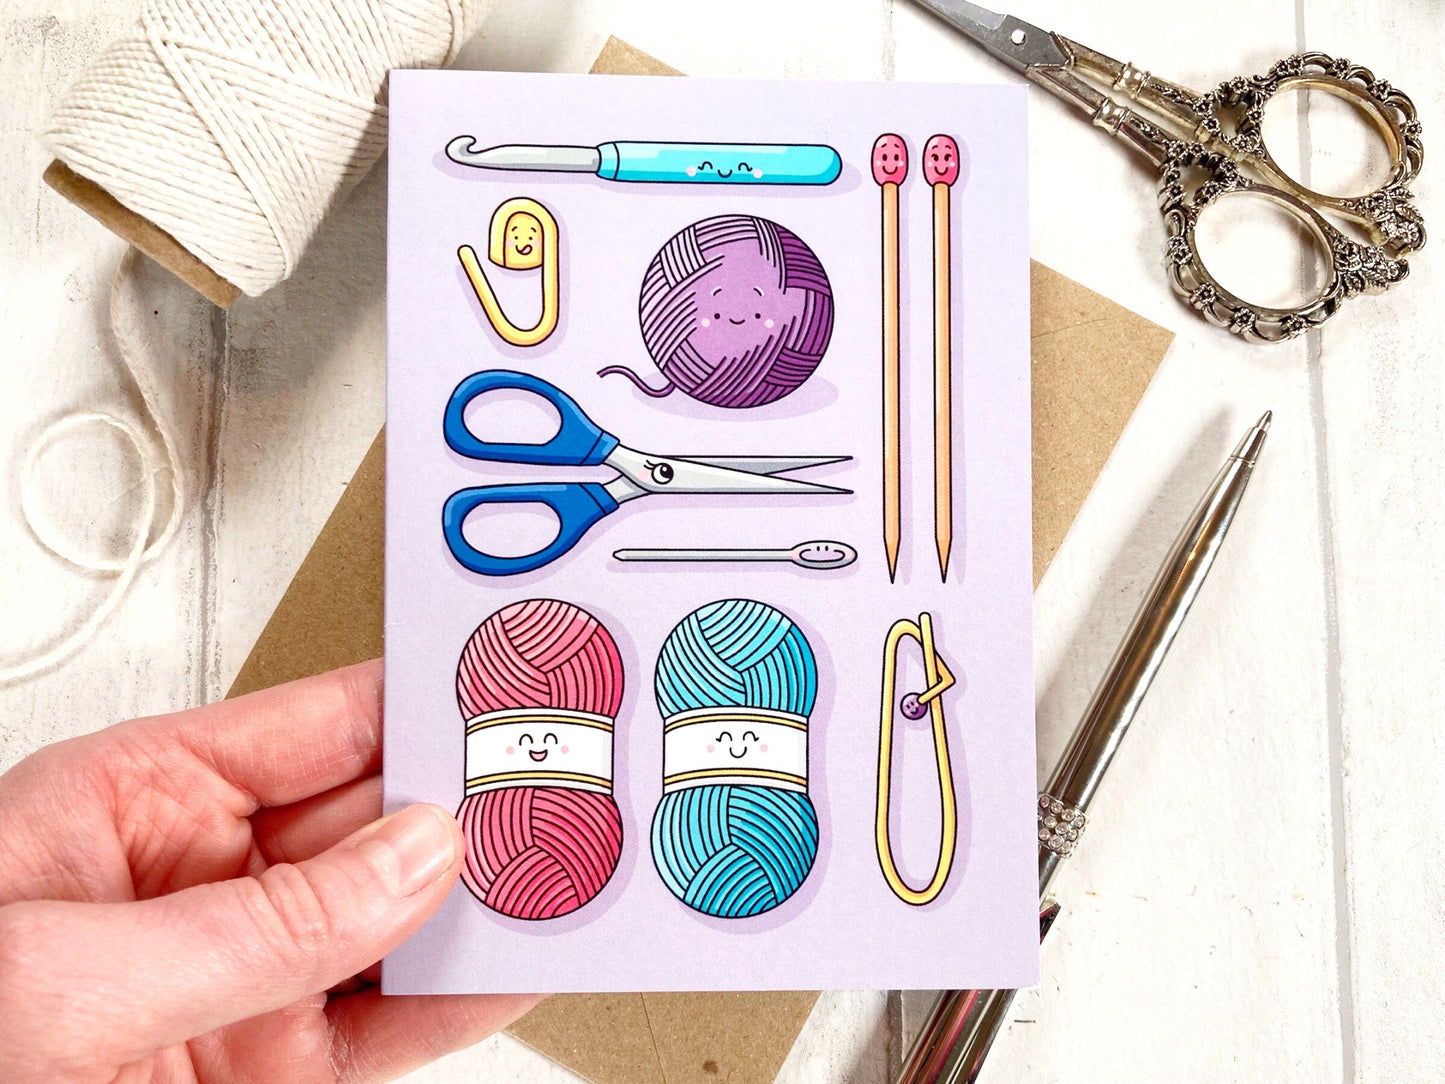 Cute Knit - A6 Greetings Card by Little Green Stitches